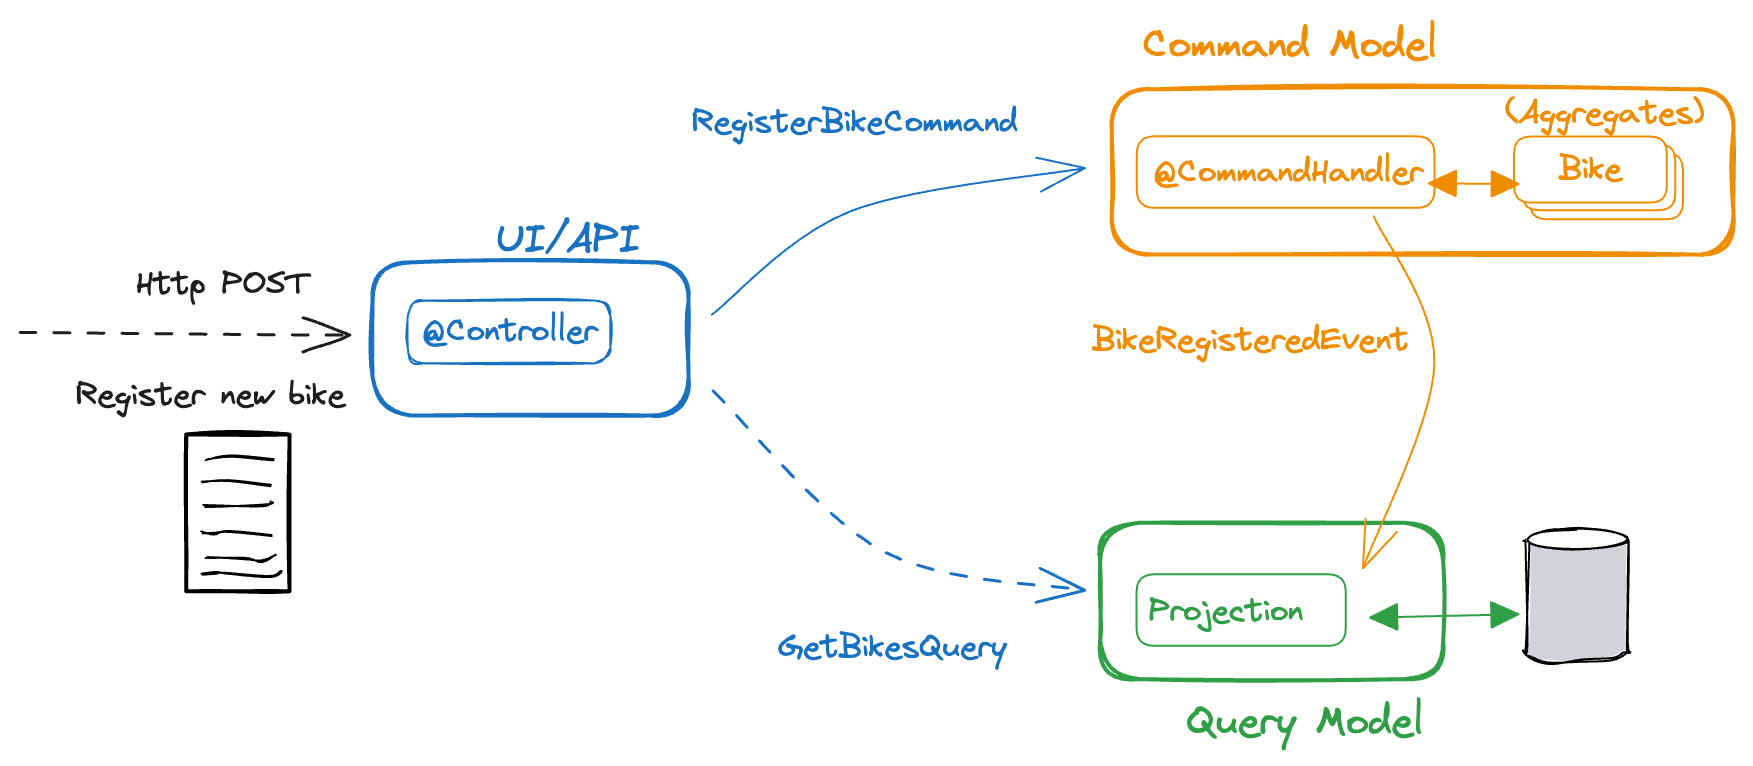 Design diagram with the logical modules for rental application: An UI/API module contains the HTTP Controller that receives the HTTP POST request to register a new bike. The HTTP Controller sends a RegisterBikeCommand to the Command Model module